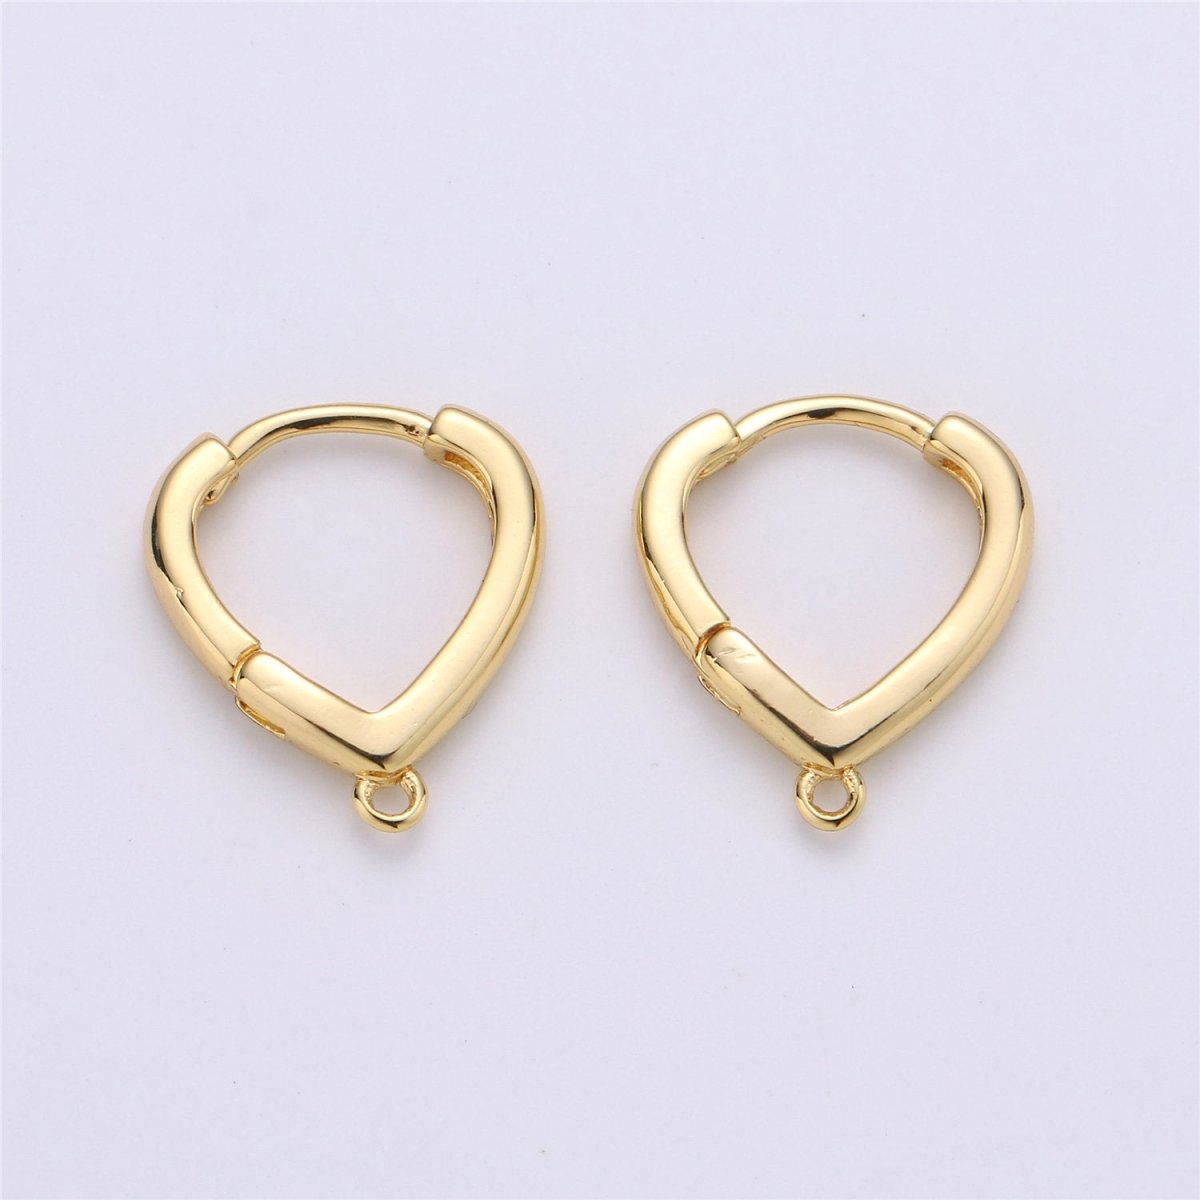 24k Gold Filled Oval Easy Snap Earring with Jump Ring, Earring Supplies for DIY Earring Jewelry, Snap Click On Earring, Oval Shape K-467 K-867 - DLUXCA